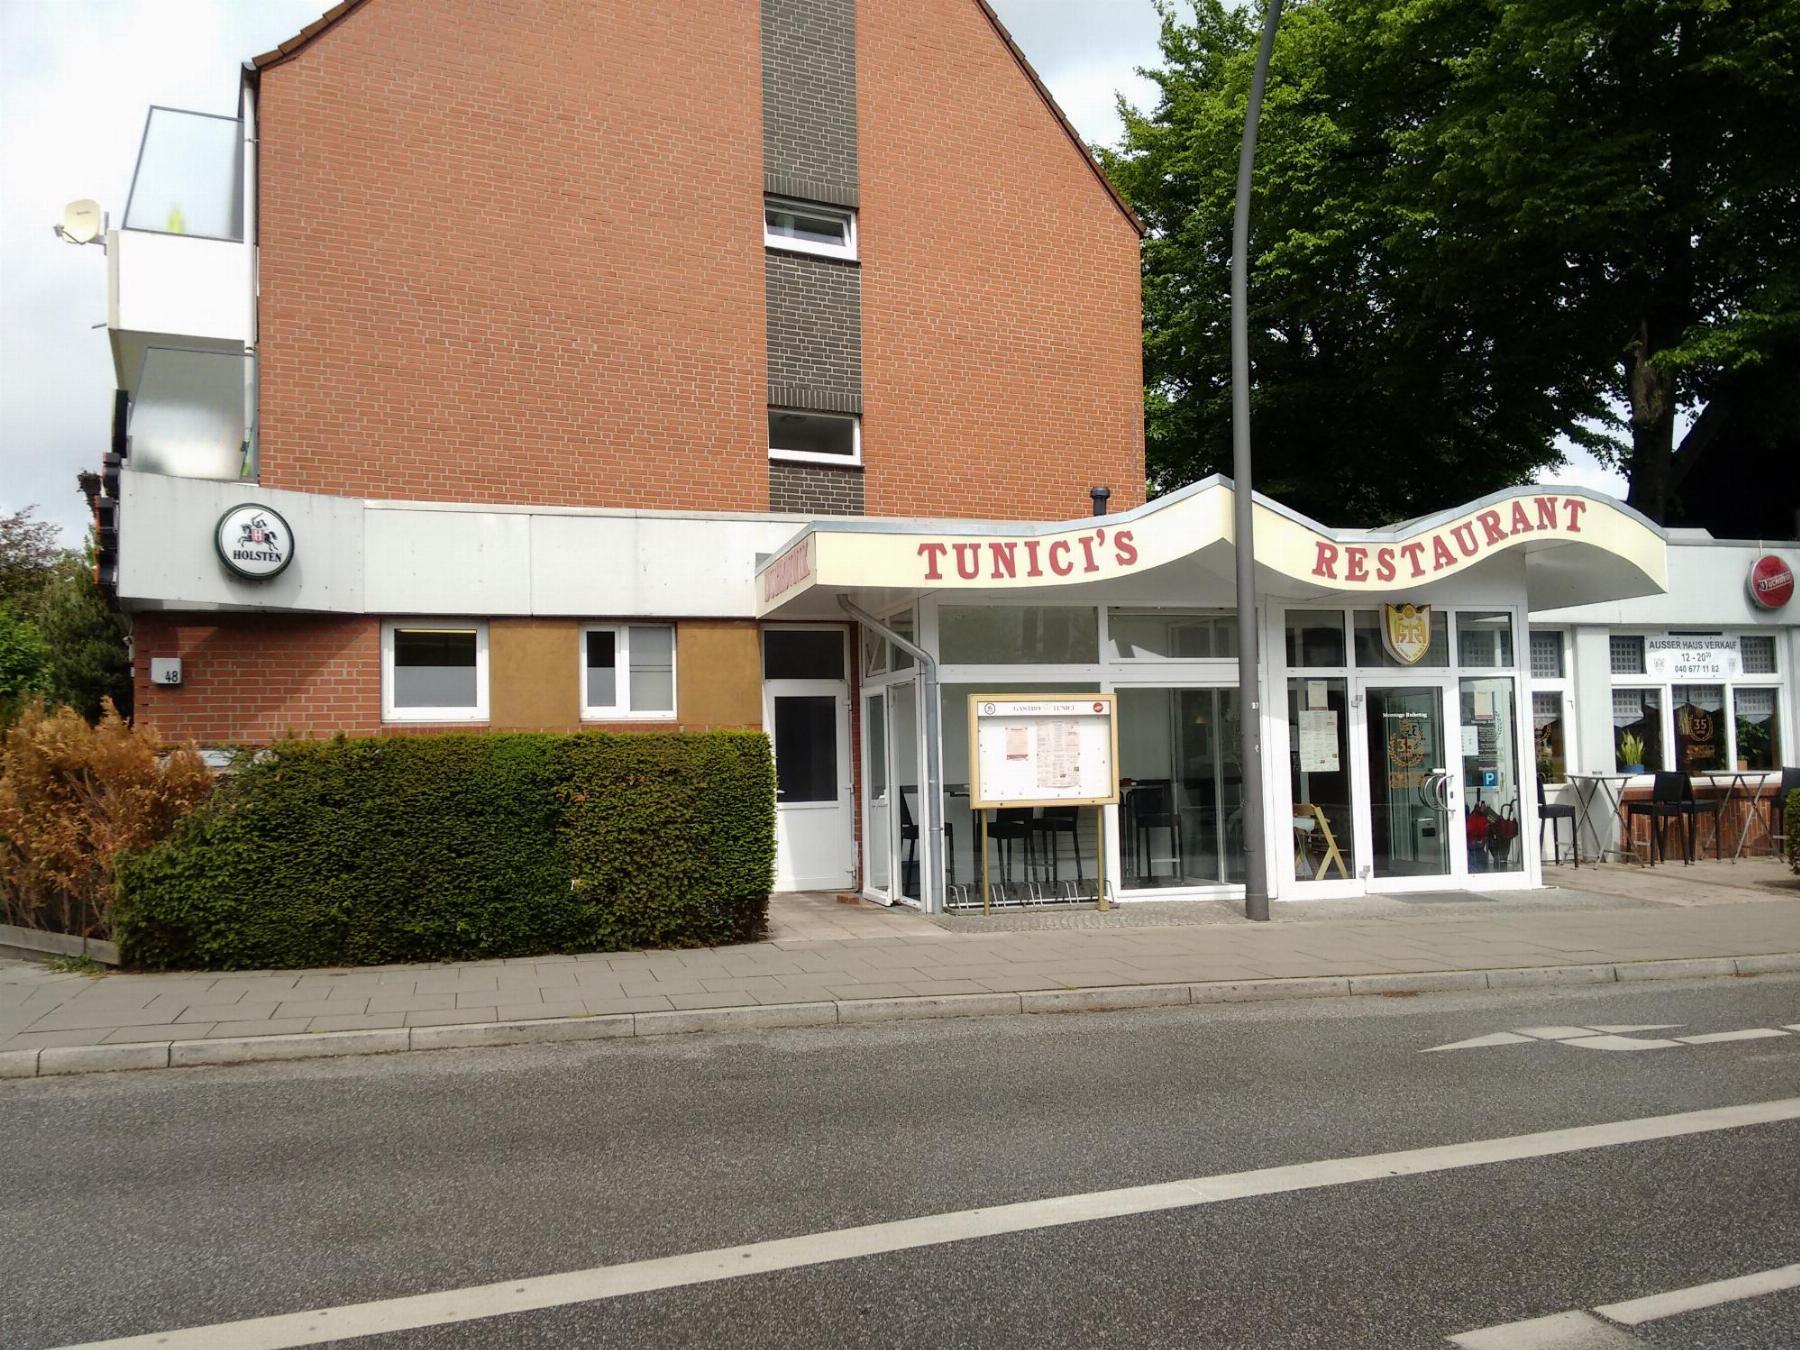 Tunici's Restaurant in Rahlstedt